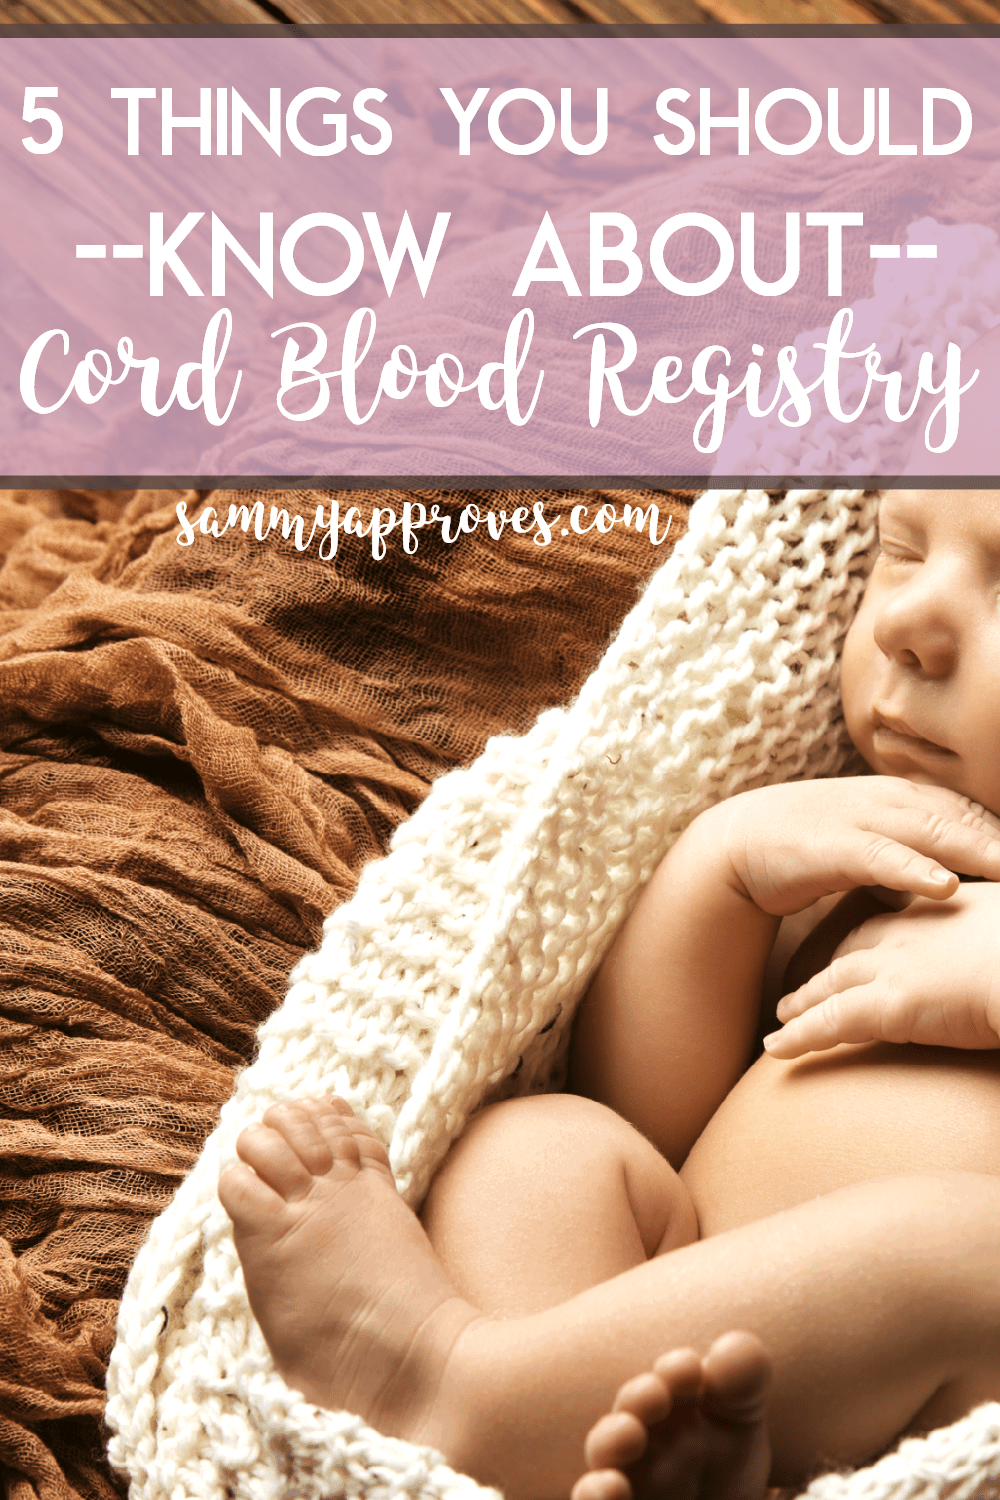 Should Know About Cord Blood Banking